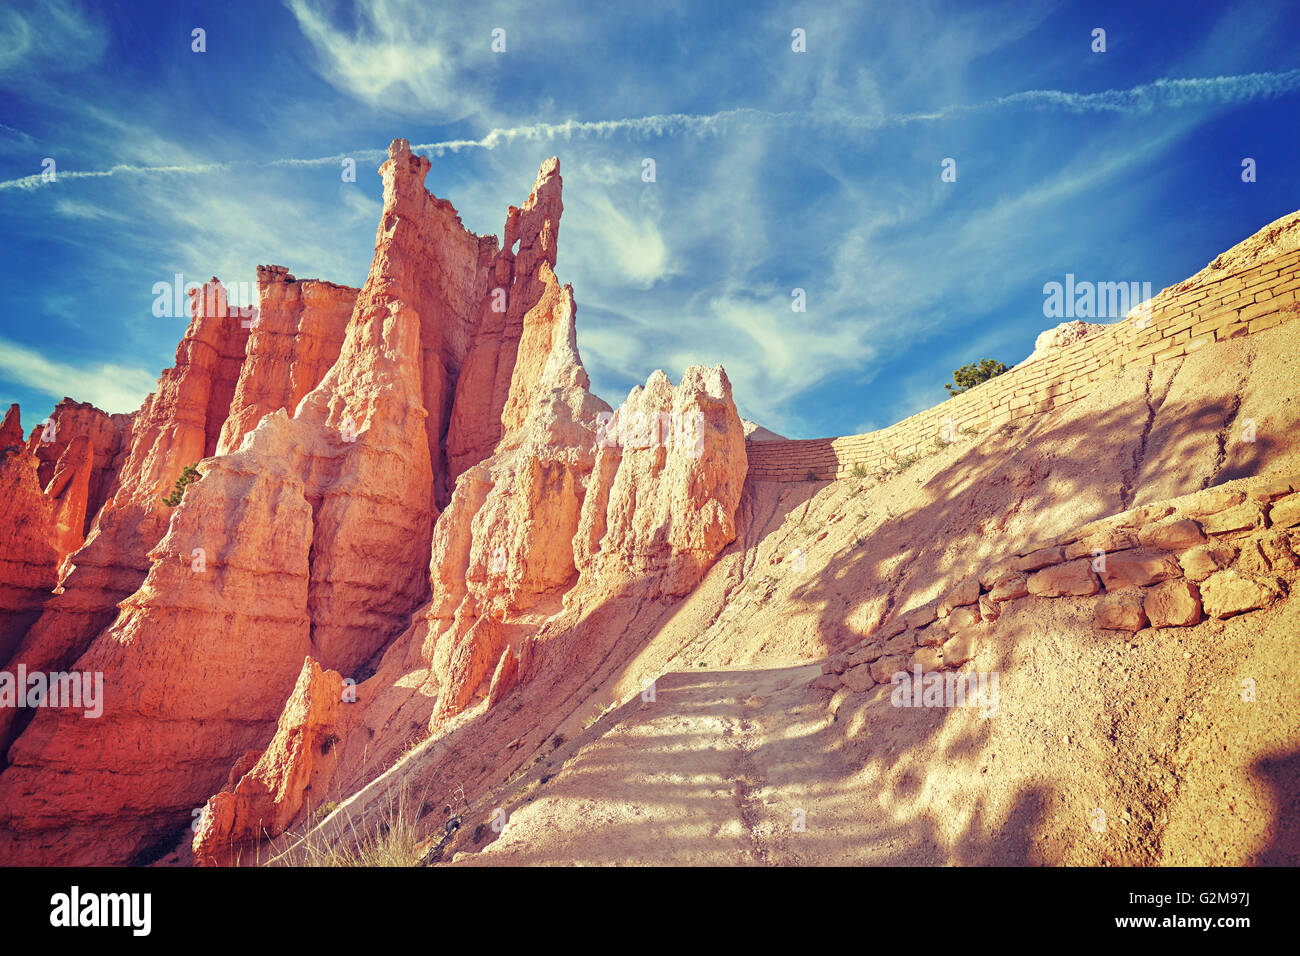 Vintage toned landscape with hoodoos in Bryce Canyon National Park, USA. Stock Photo